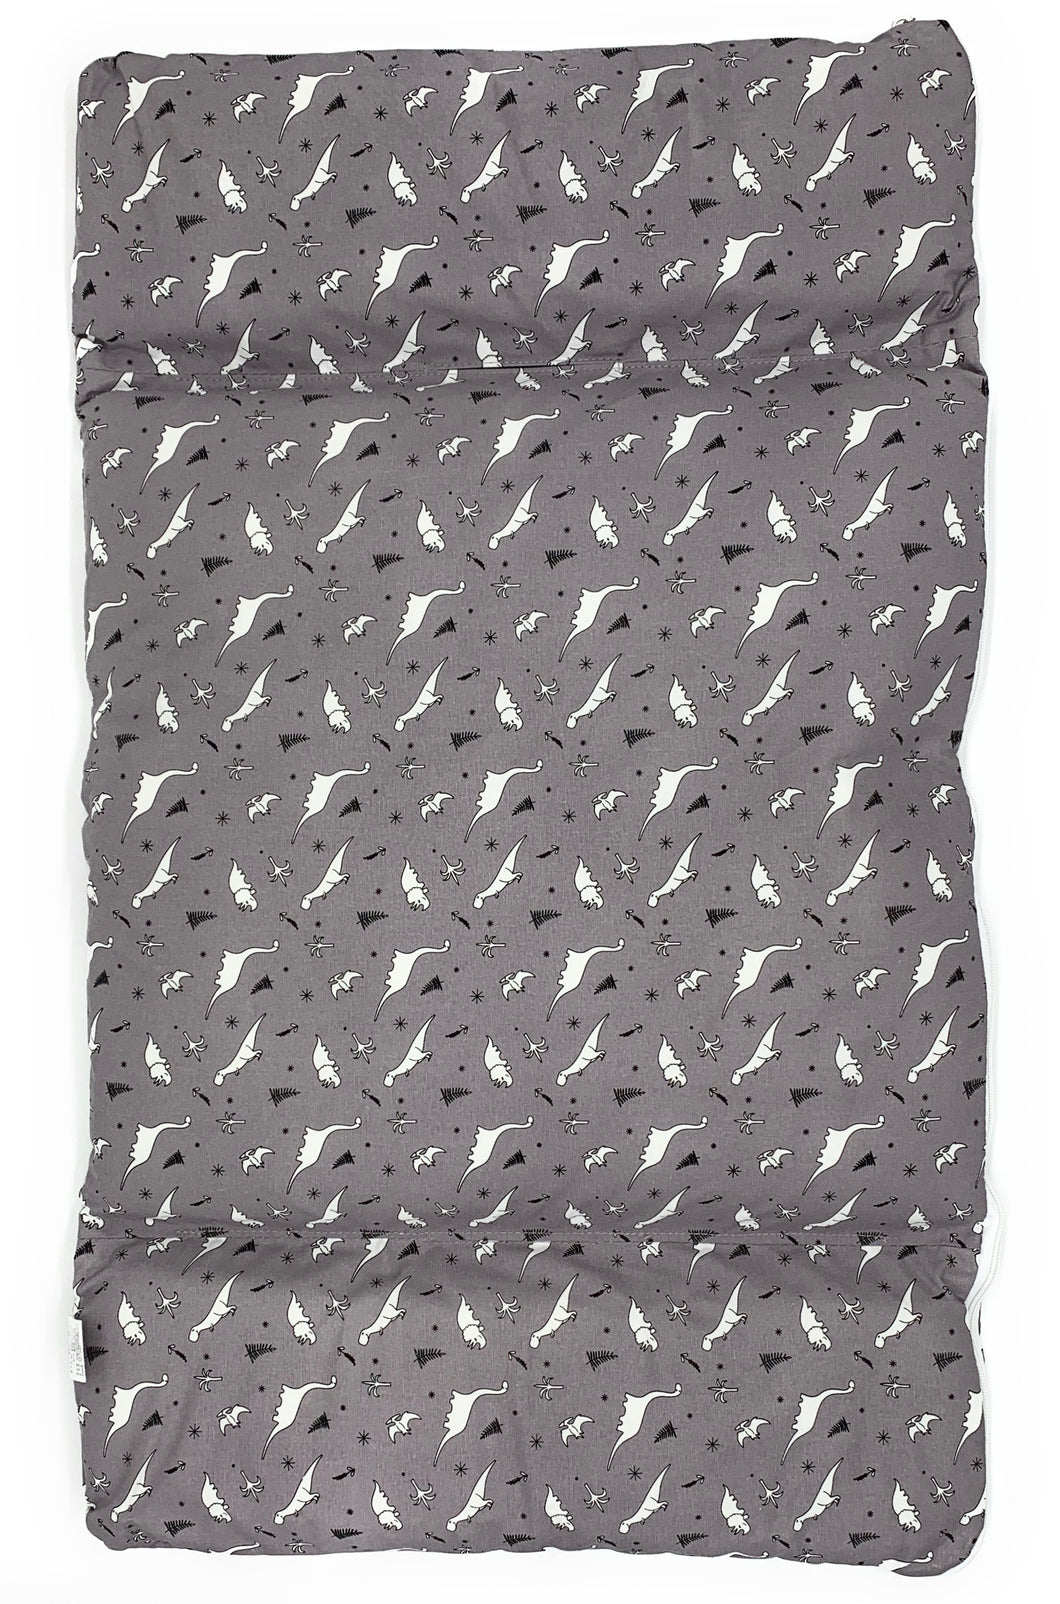 Pronto - Padded Liner with Cover - $60.00